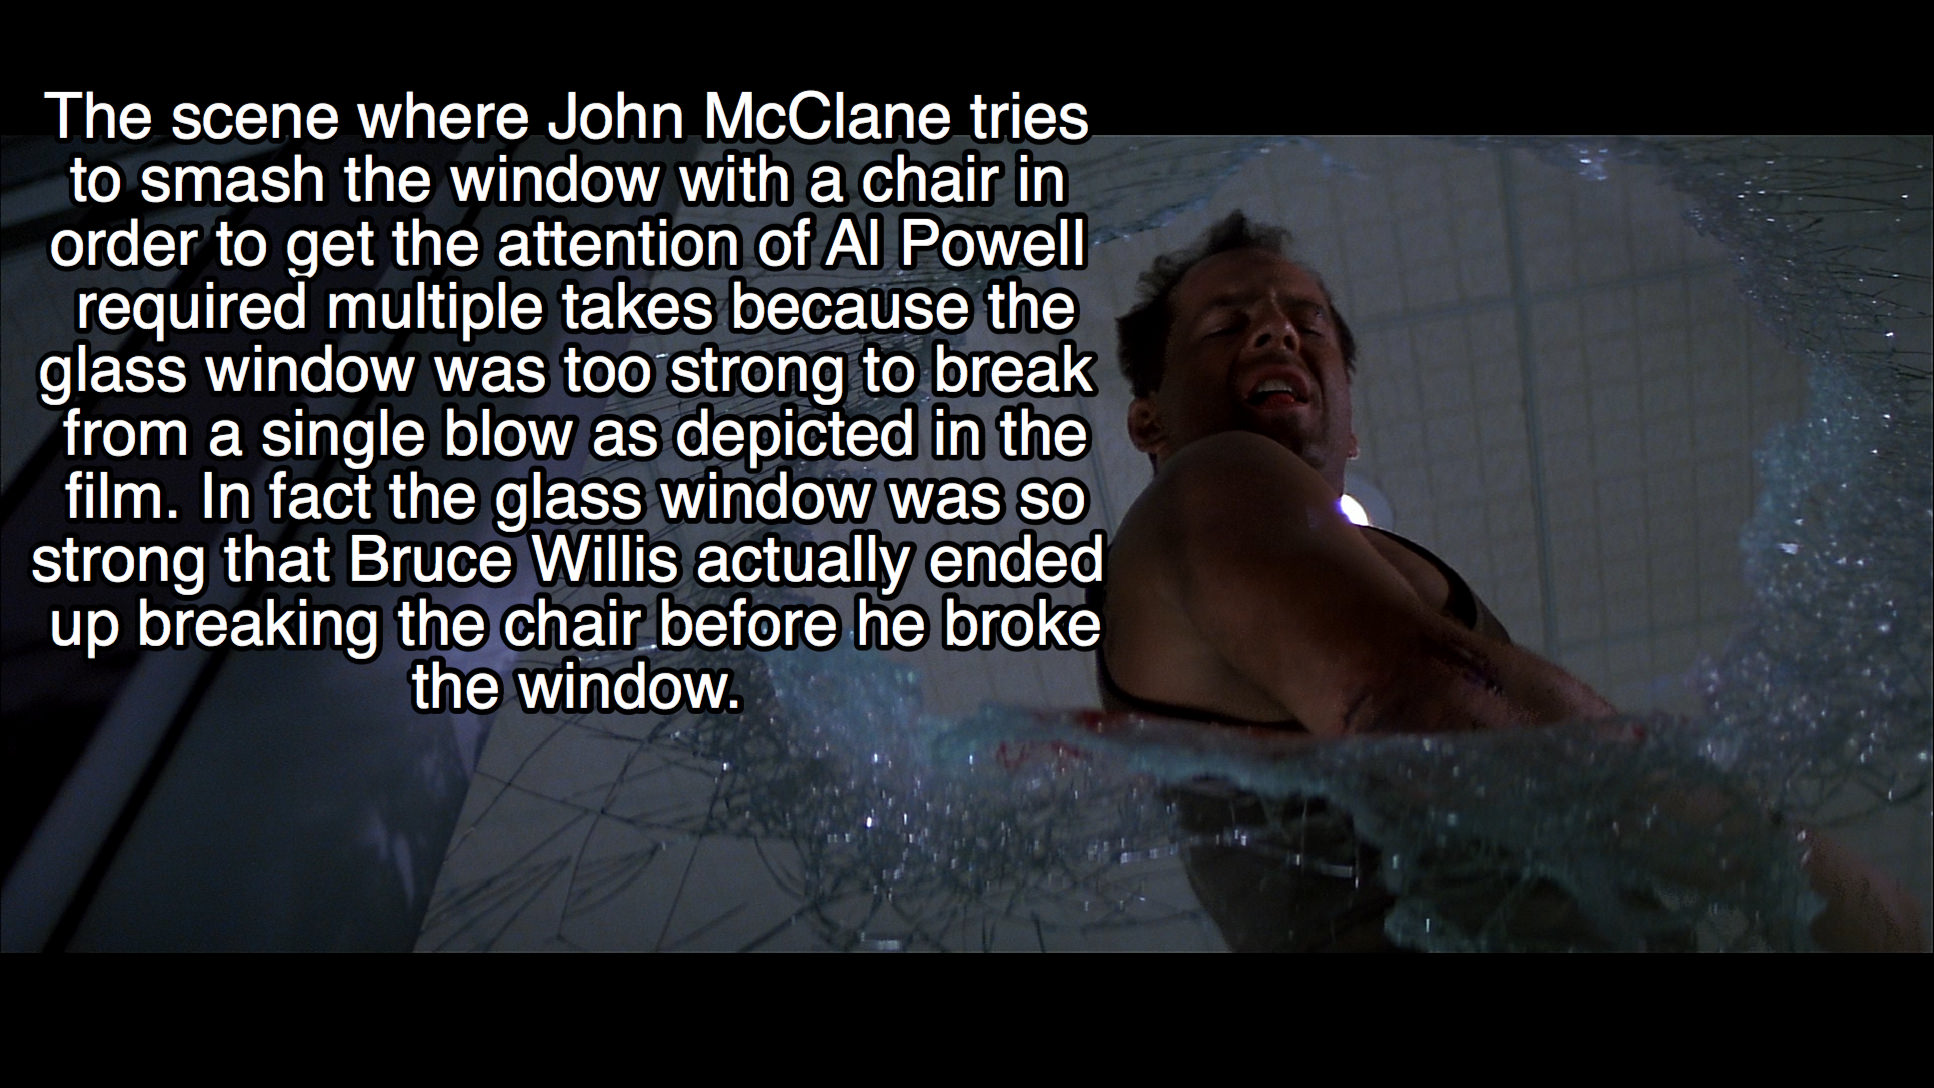 water - The scene where John McClane tries to smash the window with a chair in order to get the attention of Al Powell required multiple takes because the glass window was too strong to break from a single blow as depicted in the film. In fact the glass w